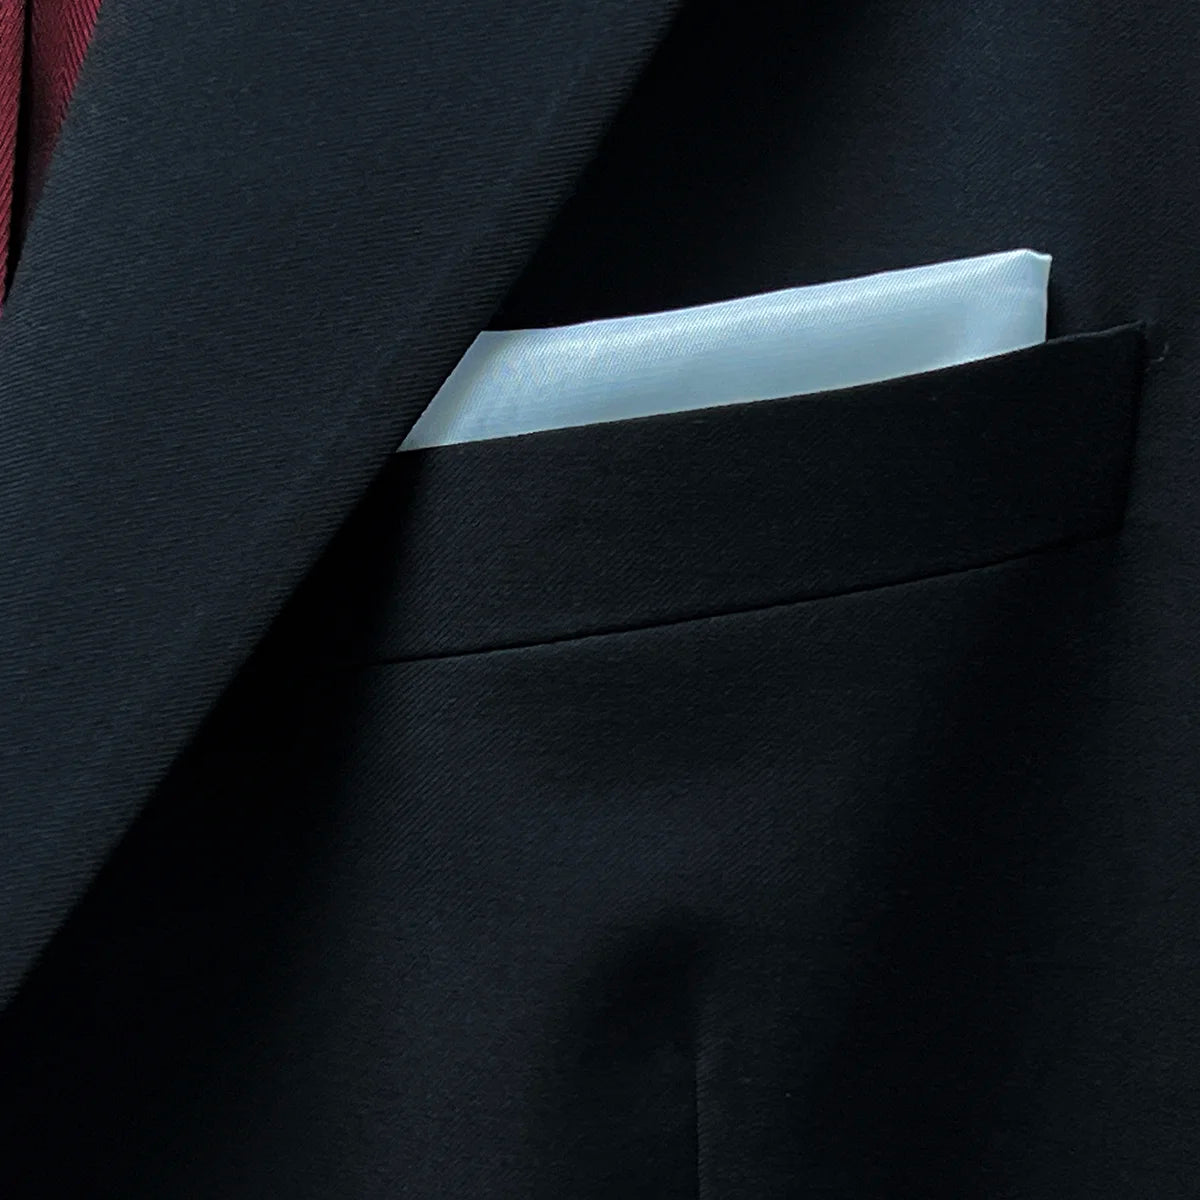 Close-up of the white bemberg lining pocket square integrated into the jacket design.